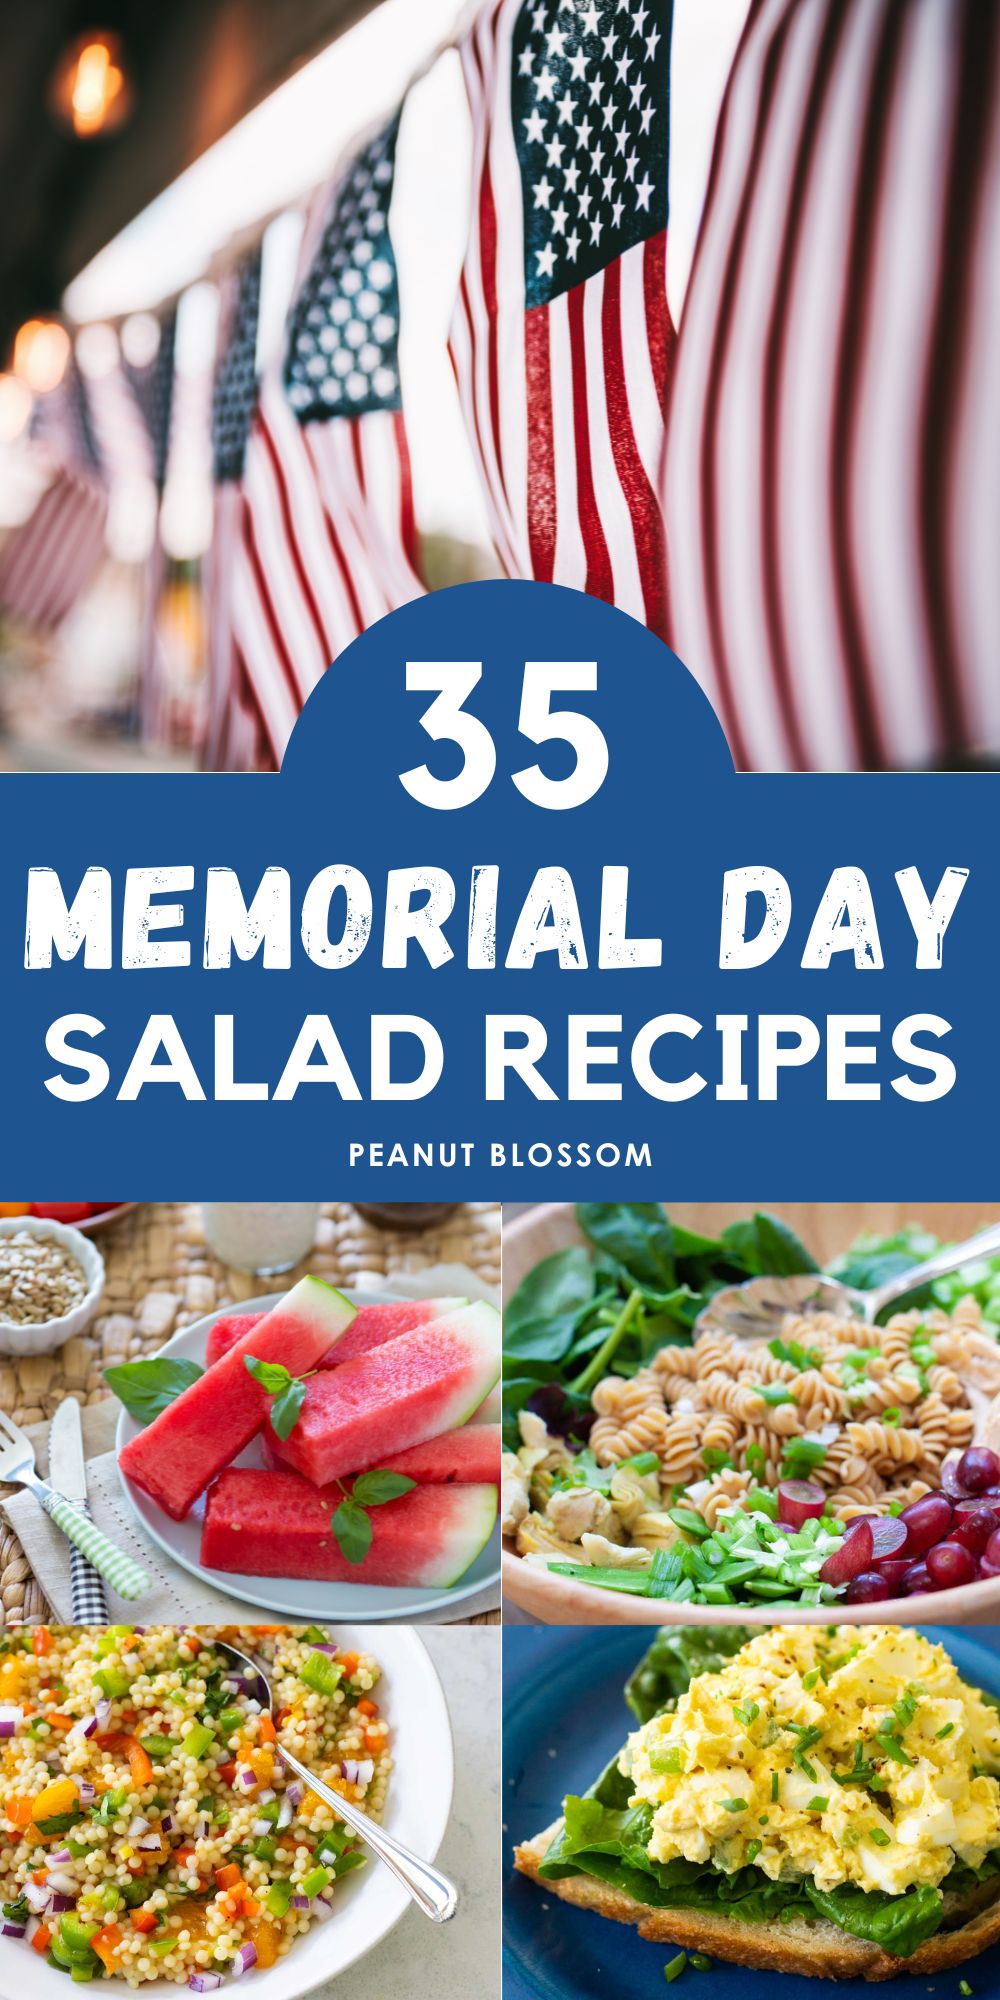 A photo collage shows an American flag bunting on top of 4 photos of fresh salads to serve at a Memorial Day party.